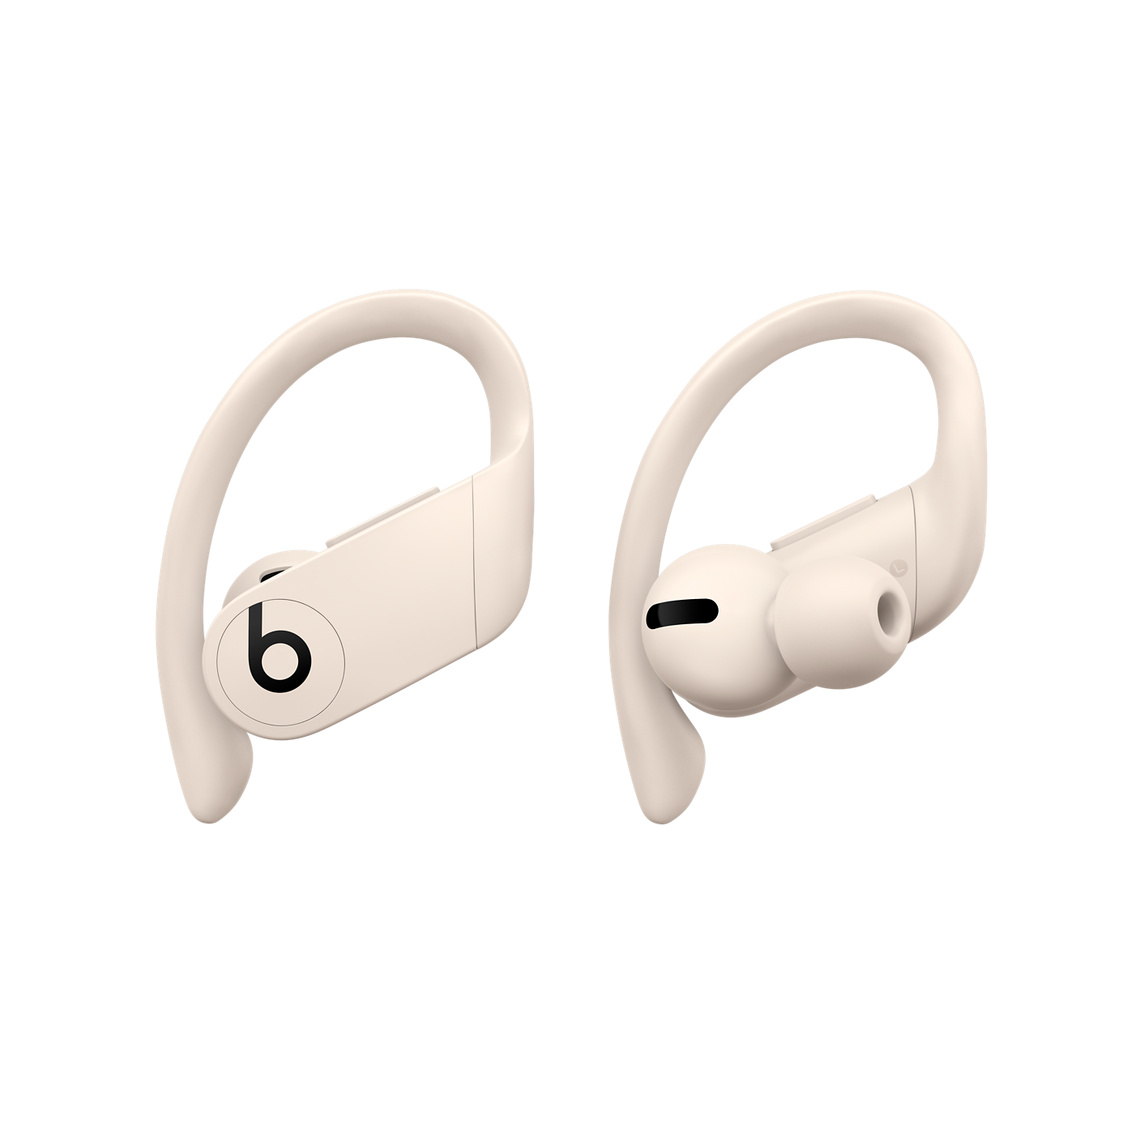 Powerbeats Pro True Wireless Earbuds, in Ivory, with adjustable, secure-fit earhooks, are customisable with multiple ear tip options for extended comfort.